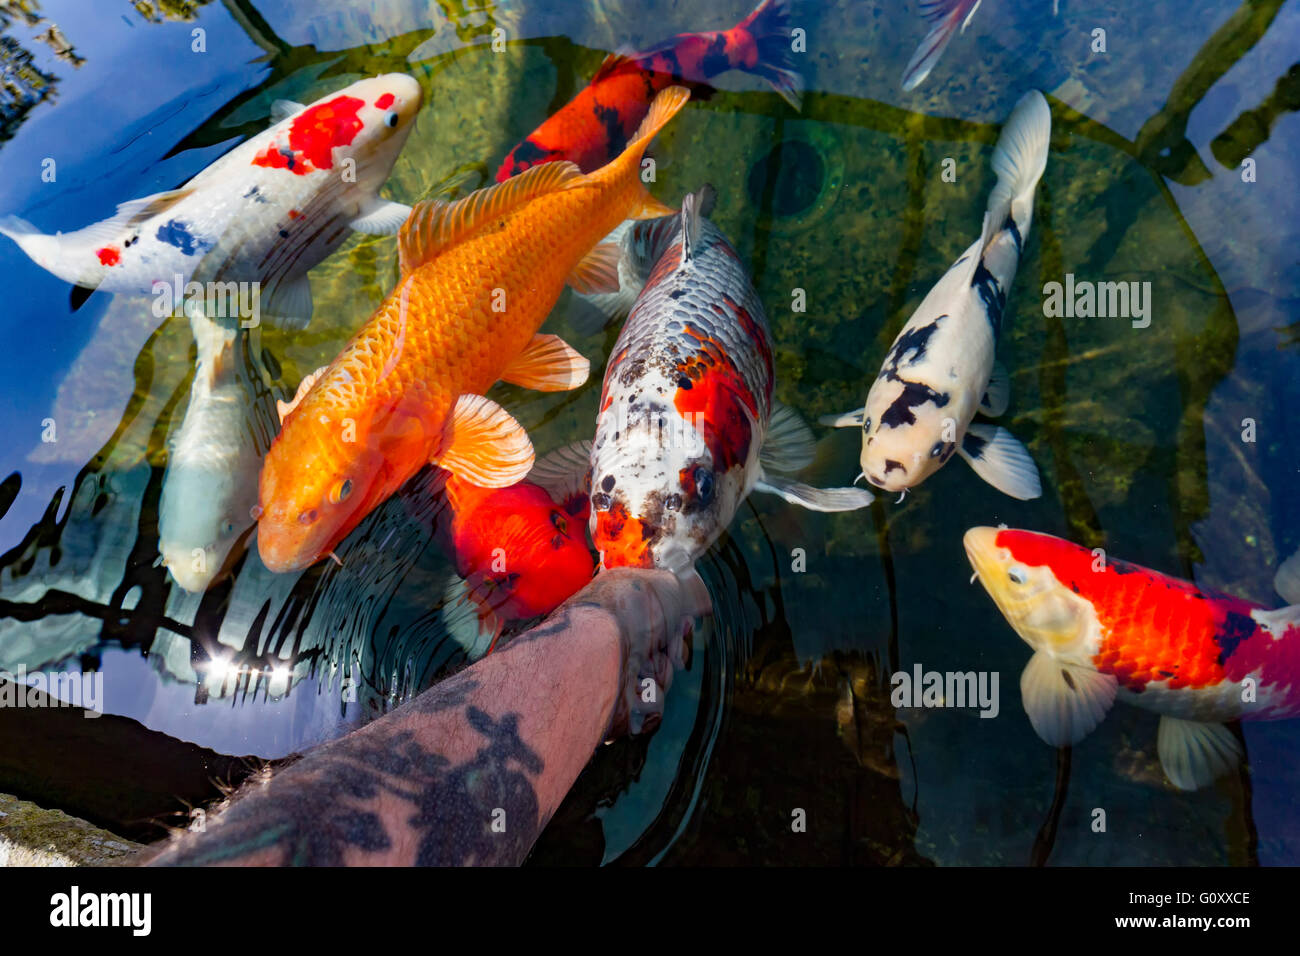 Koi Carp feeding from a persons hand in a garden pond. Stock Photo